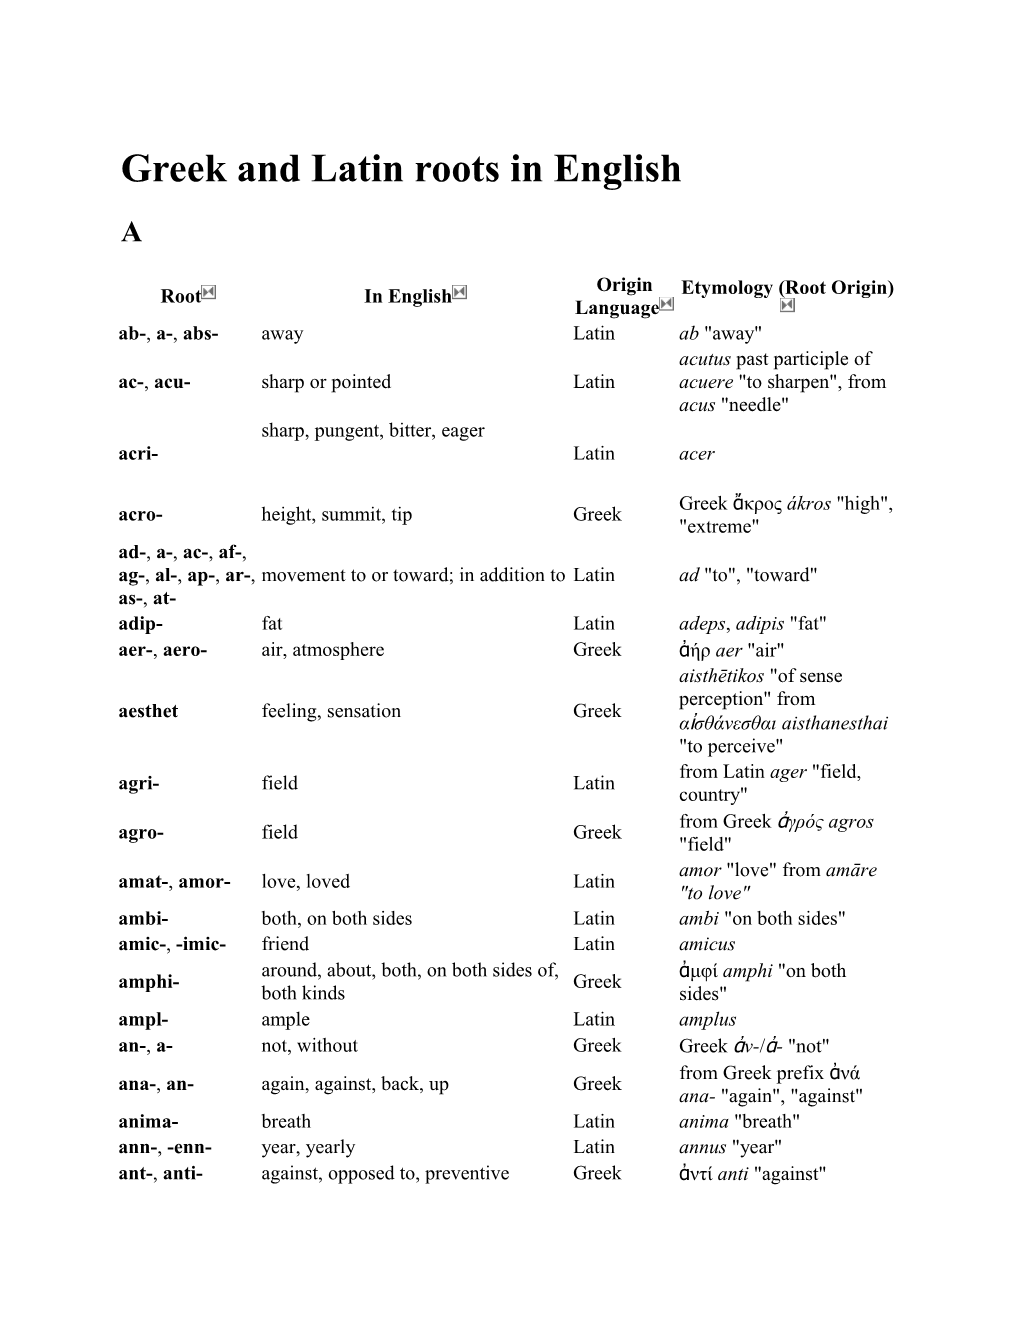 Greek and Latin Roots in English